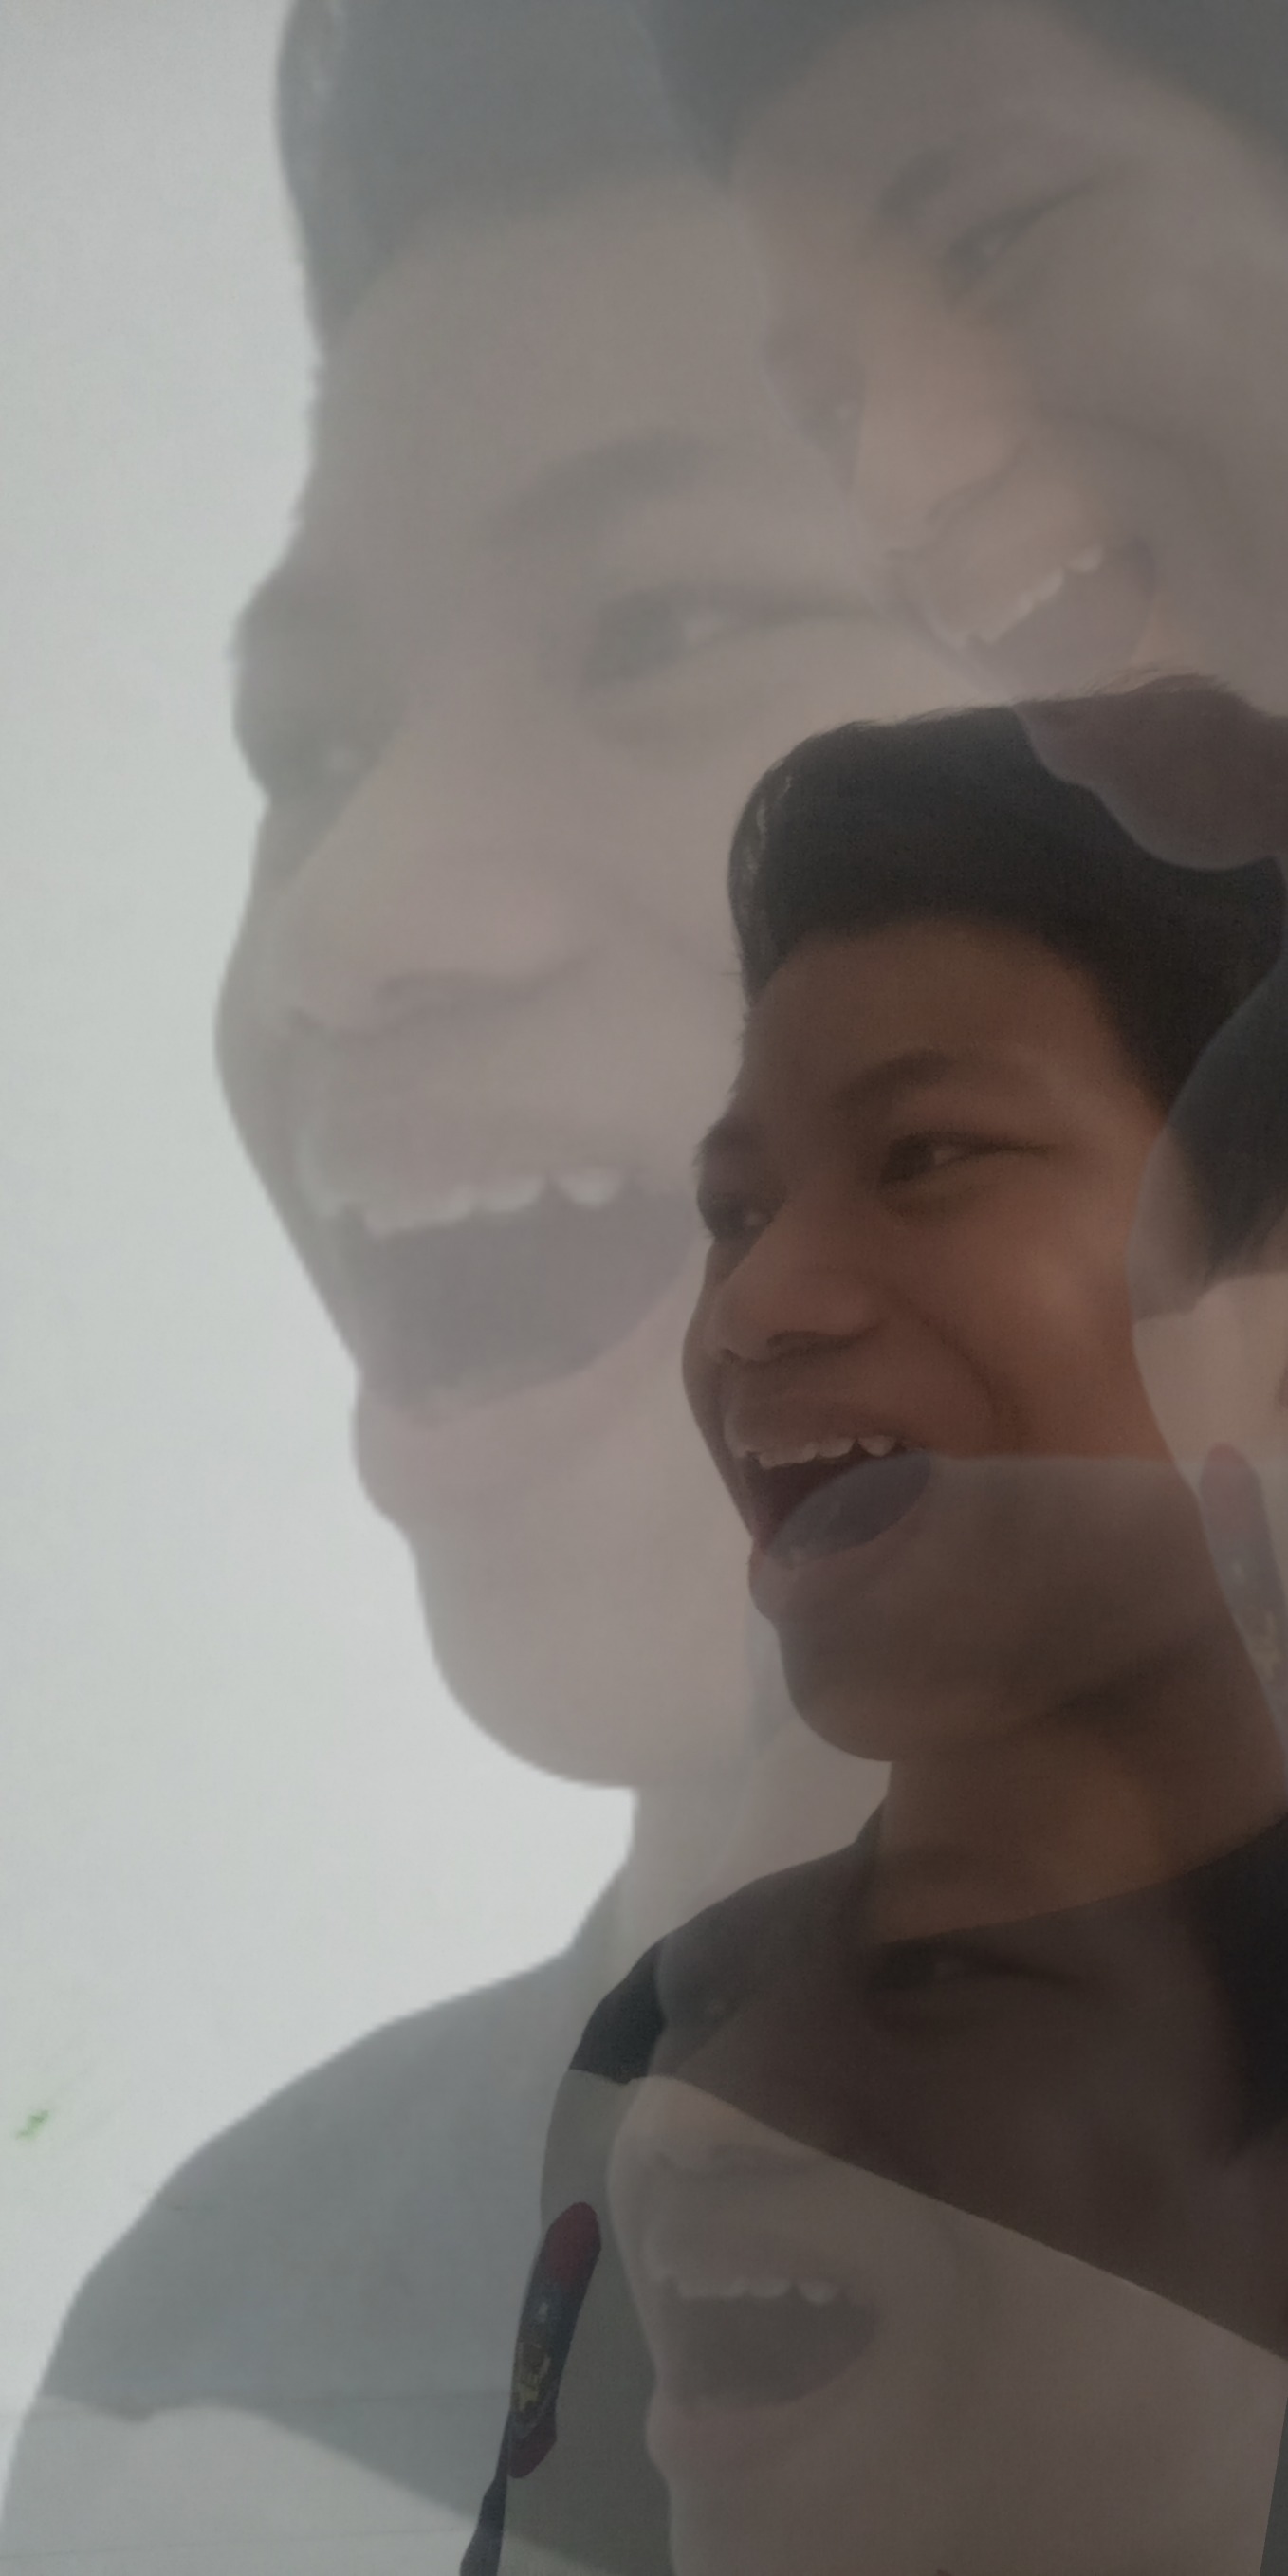 Akifhaziq hysterically laughing Blank Meme Template